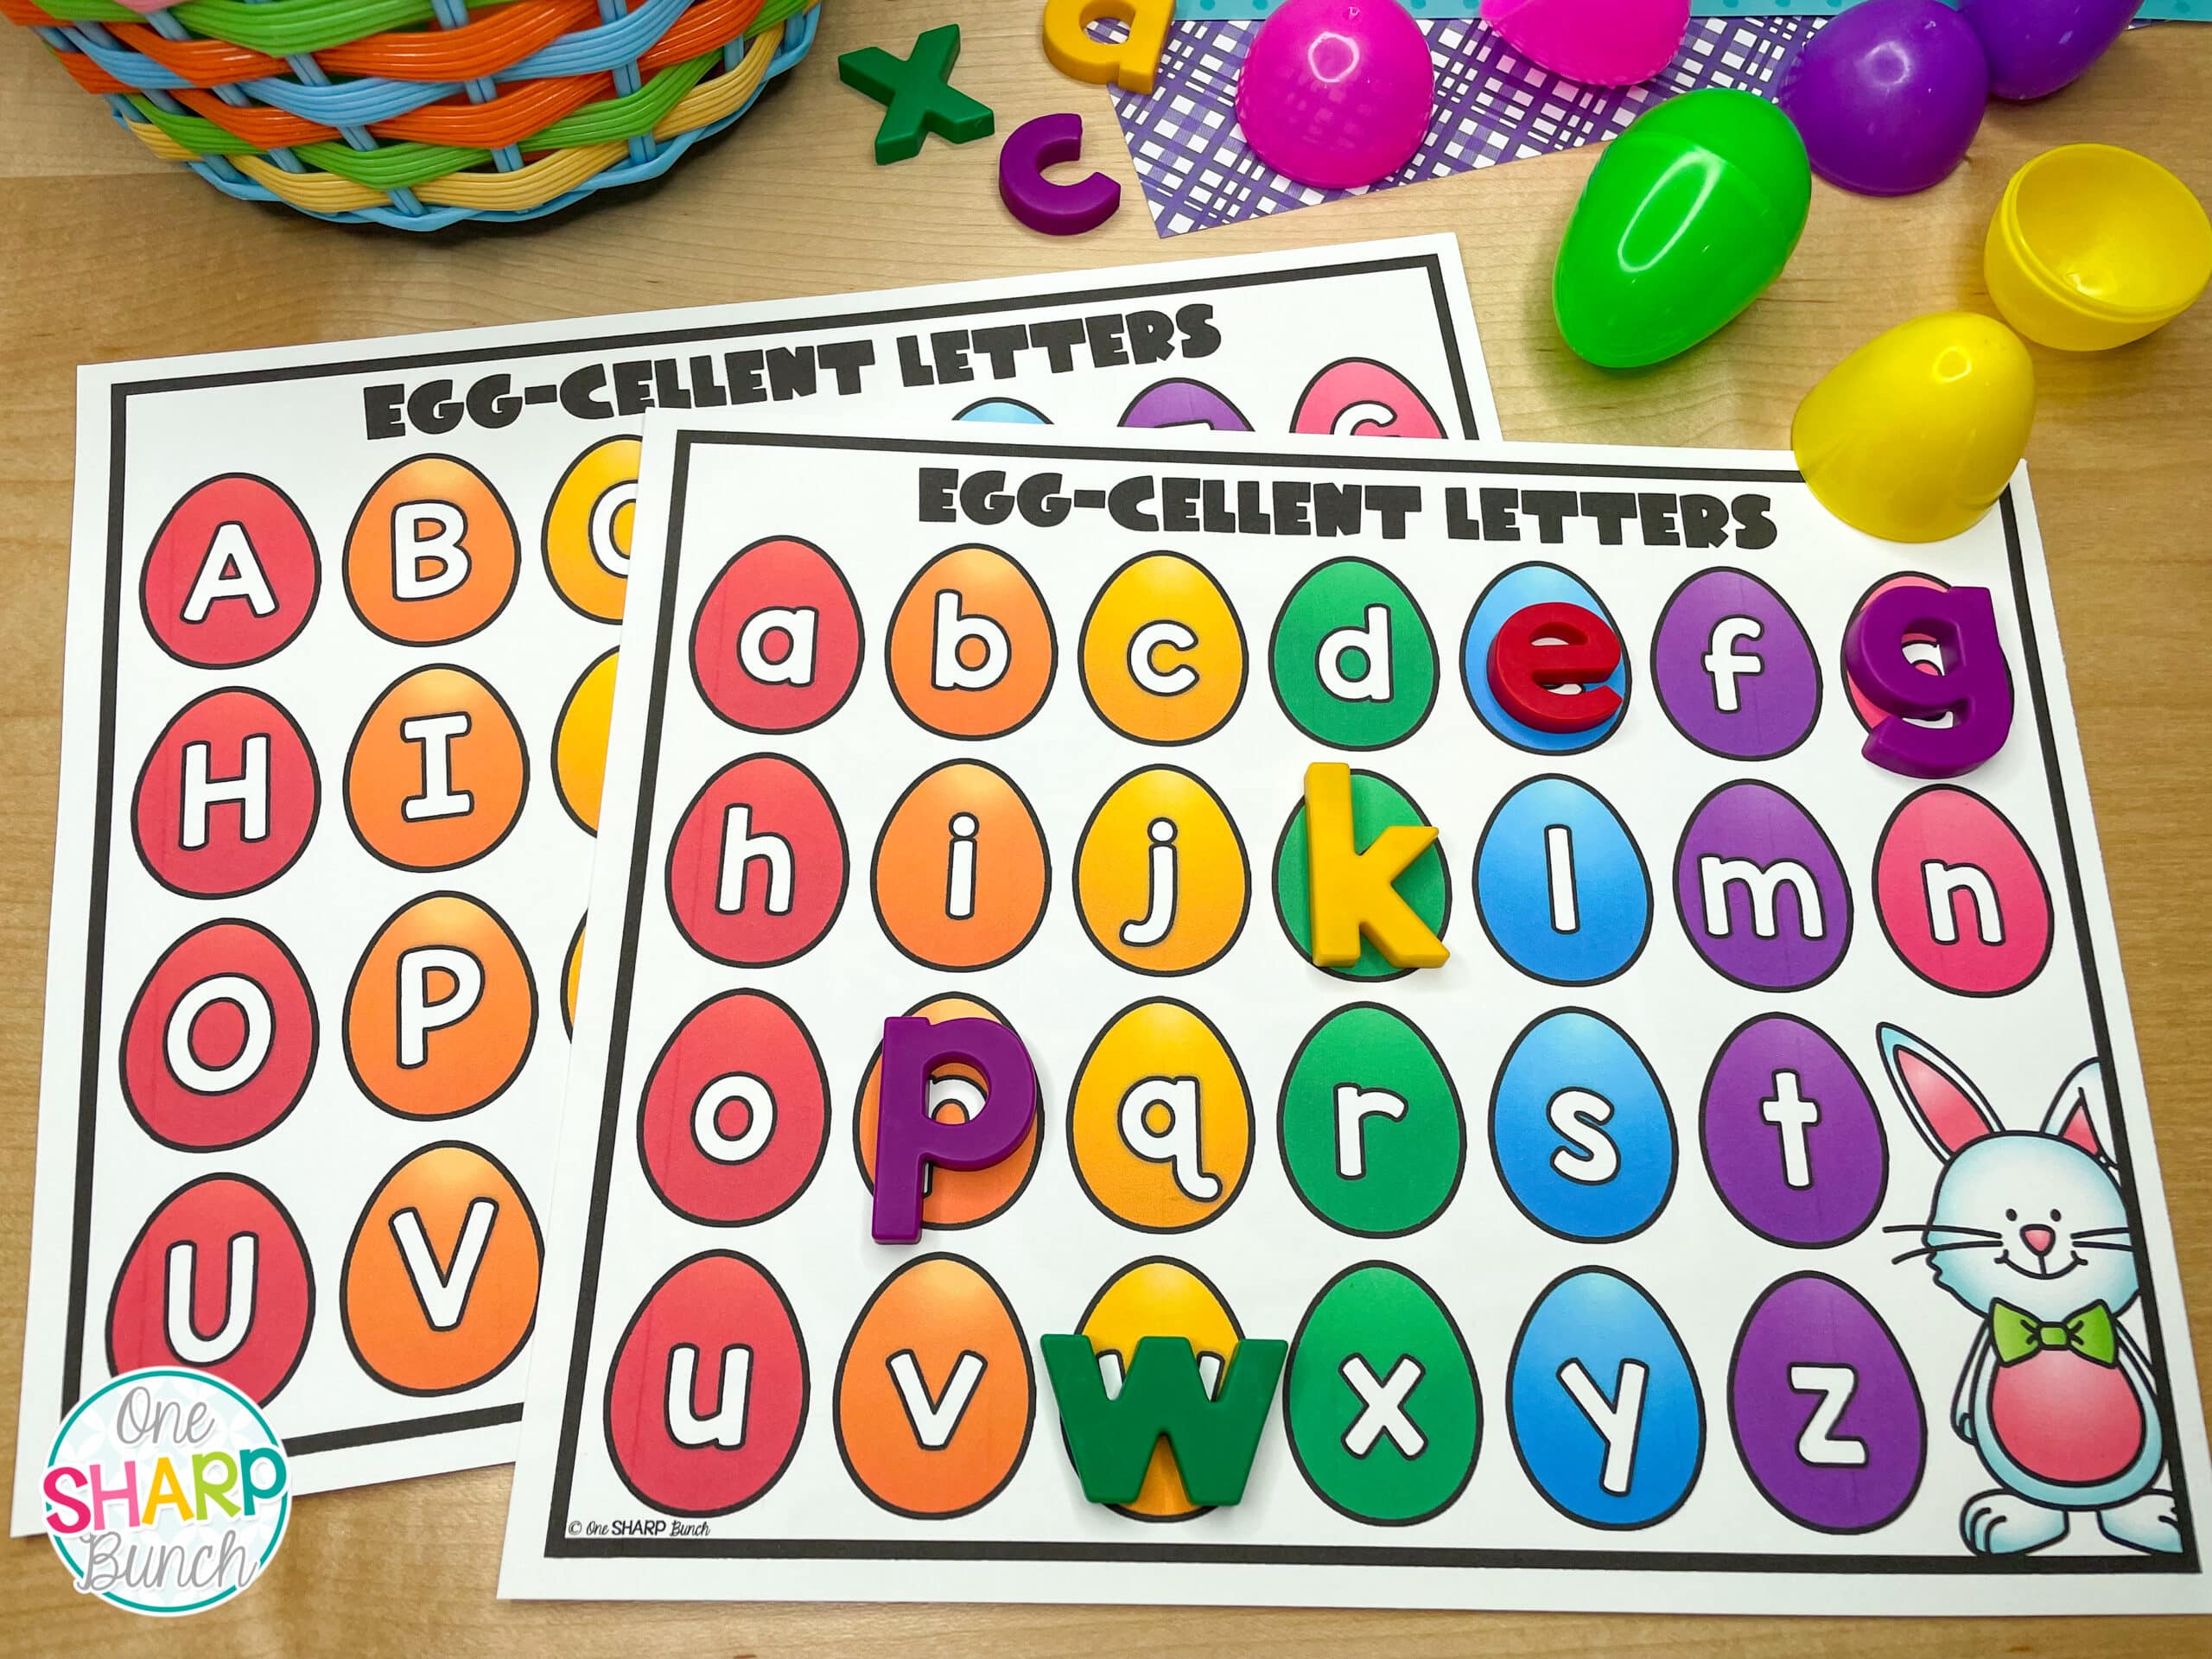 Don't fill those plastic Easter eggs with candy! Instead, fill them with magnetic letters and use them for alphabet activities! These FREE Easter egg alphabet centers are sure to add just enough magic to keep your preschool and kindergarten students engaged, without them realizing they are actually practicing letter recognition! Perfect for your literacy centers and magnetic letter activities! #preschool #kindergarten #alphabetactivities #teacher #easter #magneticletters #literacycenters